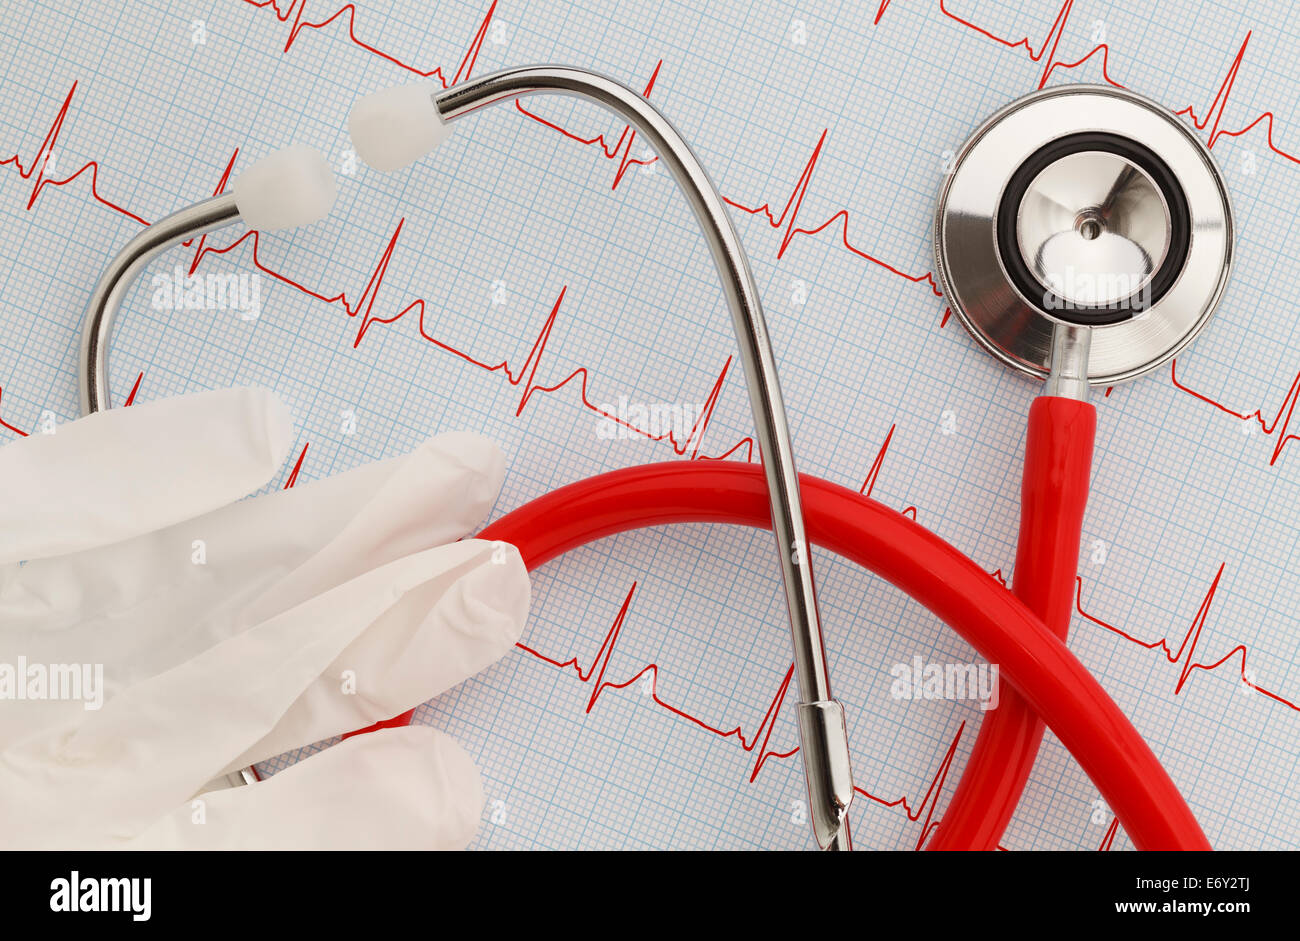 Stethoscope with an EKG readout and gloves. Stock Photo